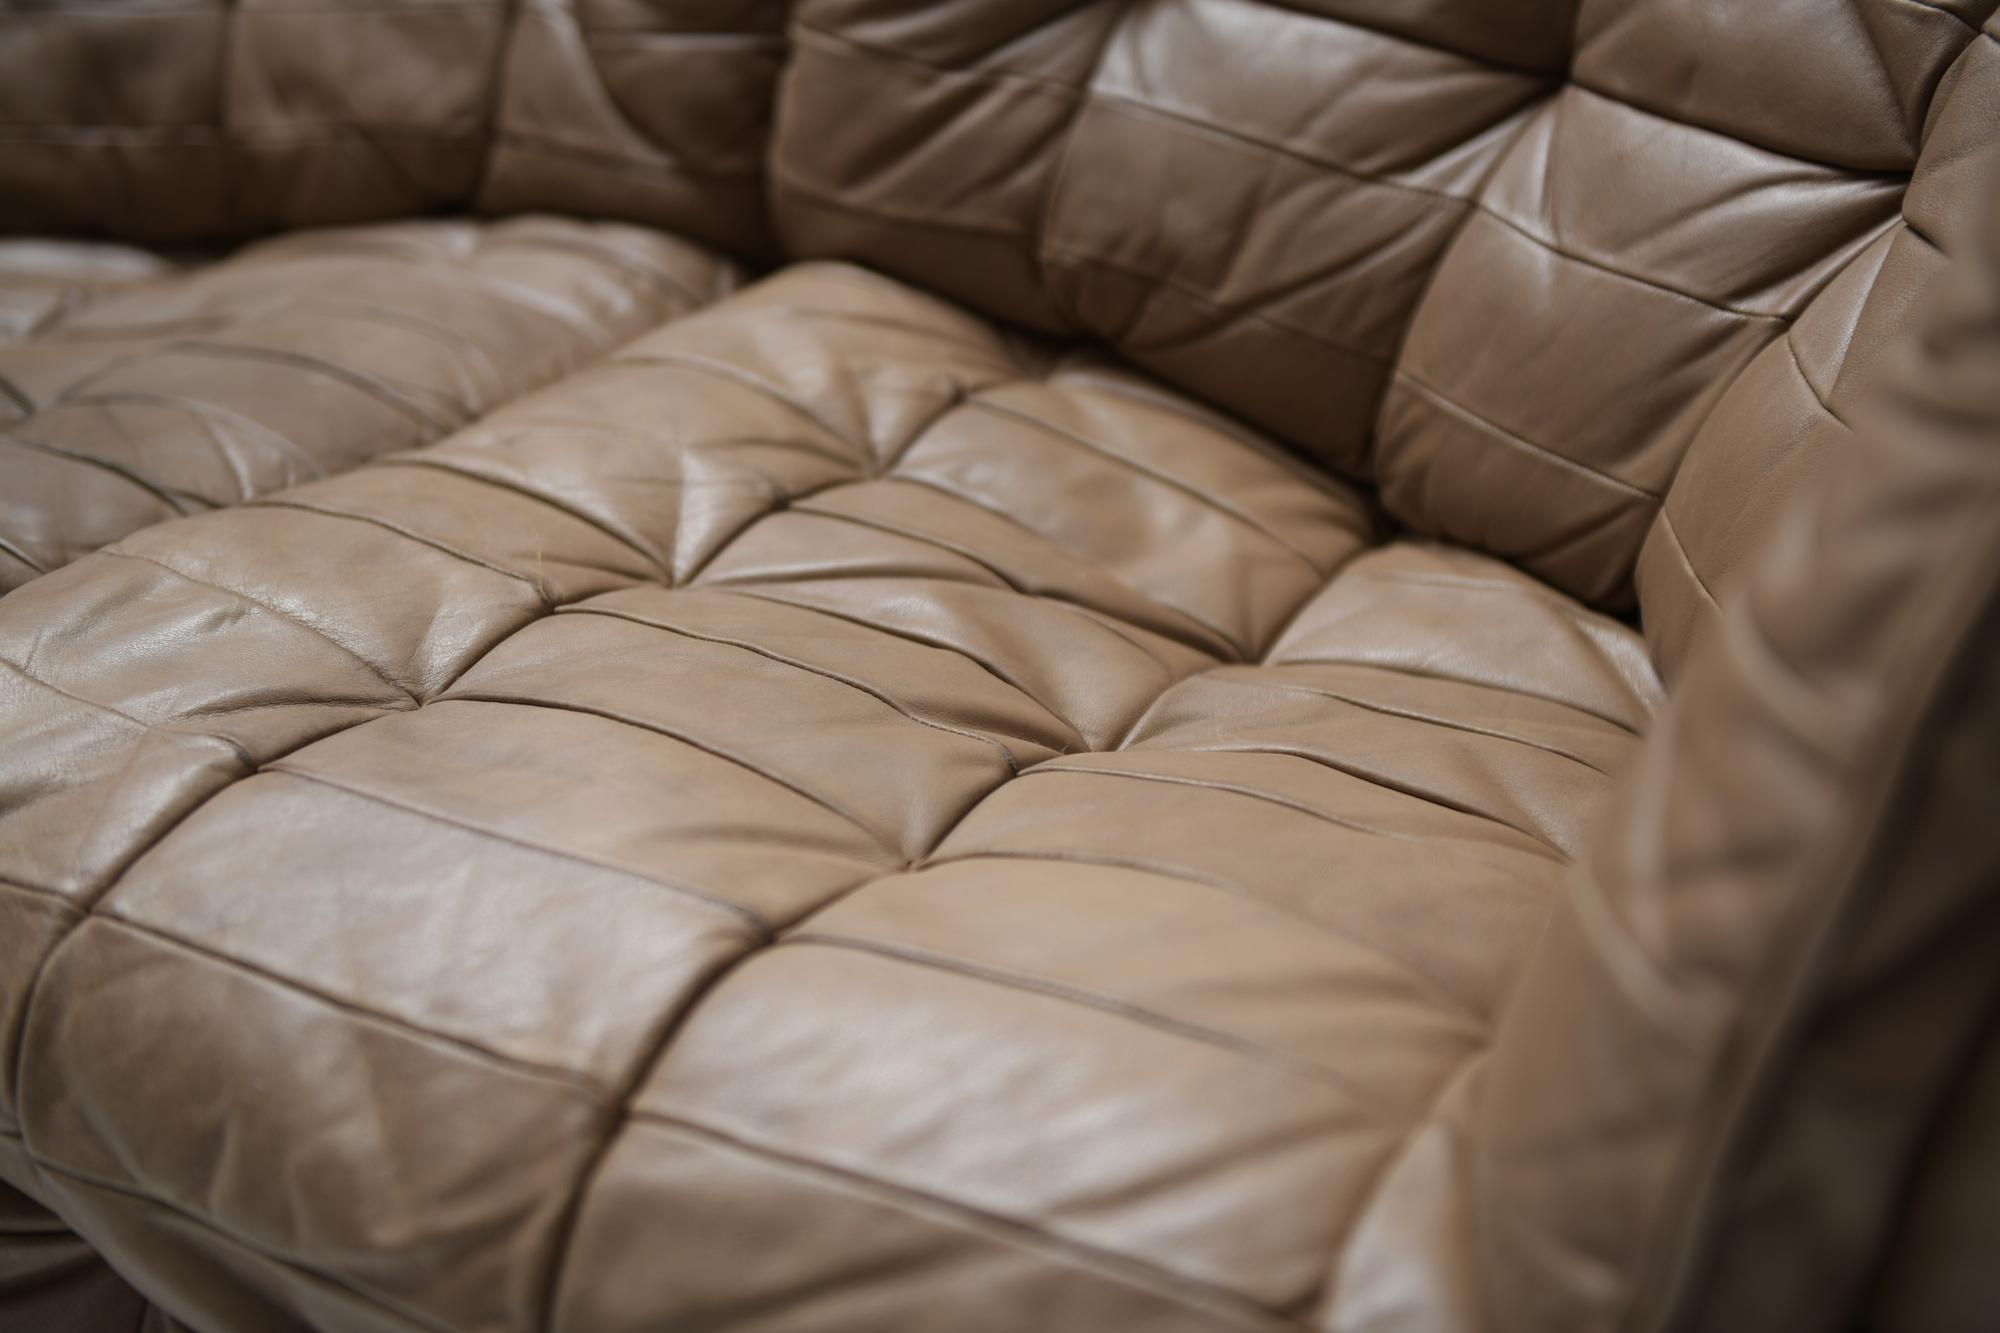 Ds 11 Modular Sofa in Brown Patchwork Leather by De Sede Team for De Sede Swiss For Sale 4